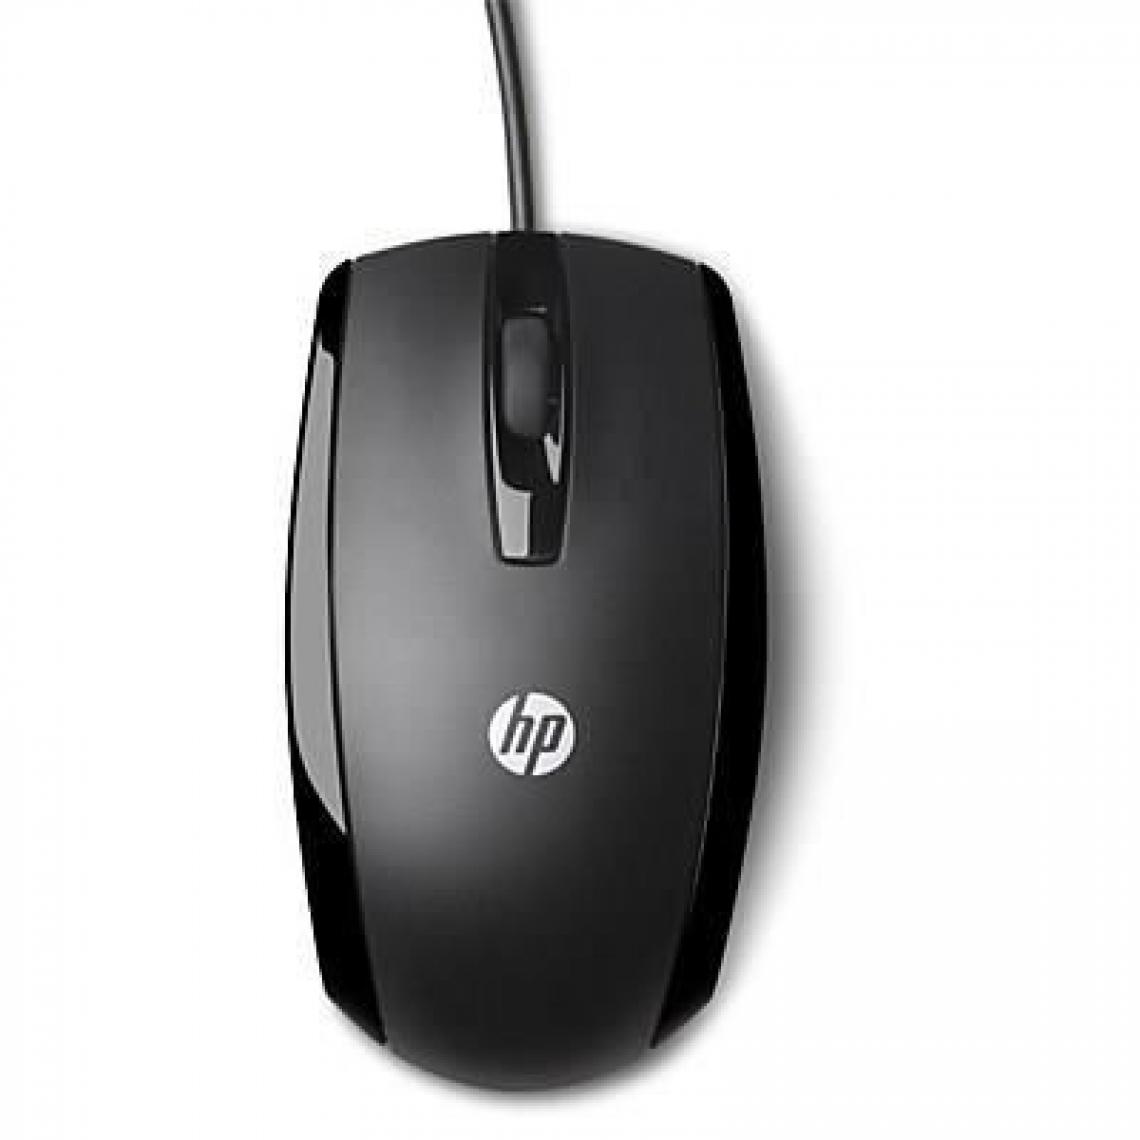 Hewlett Packard - Souris filaire HP Wired Mouse X500 - Souris